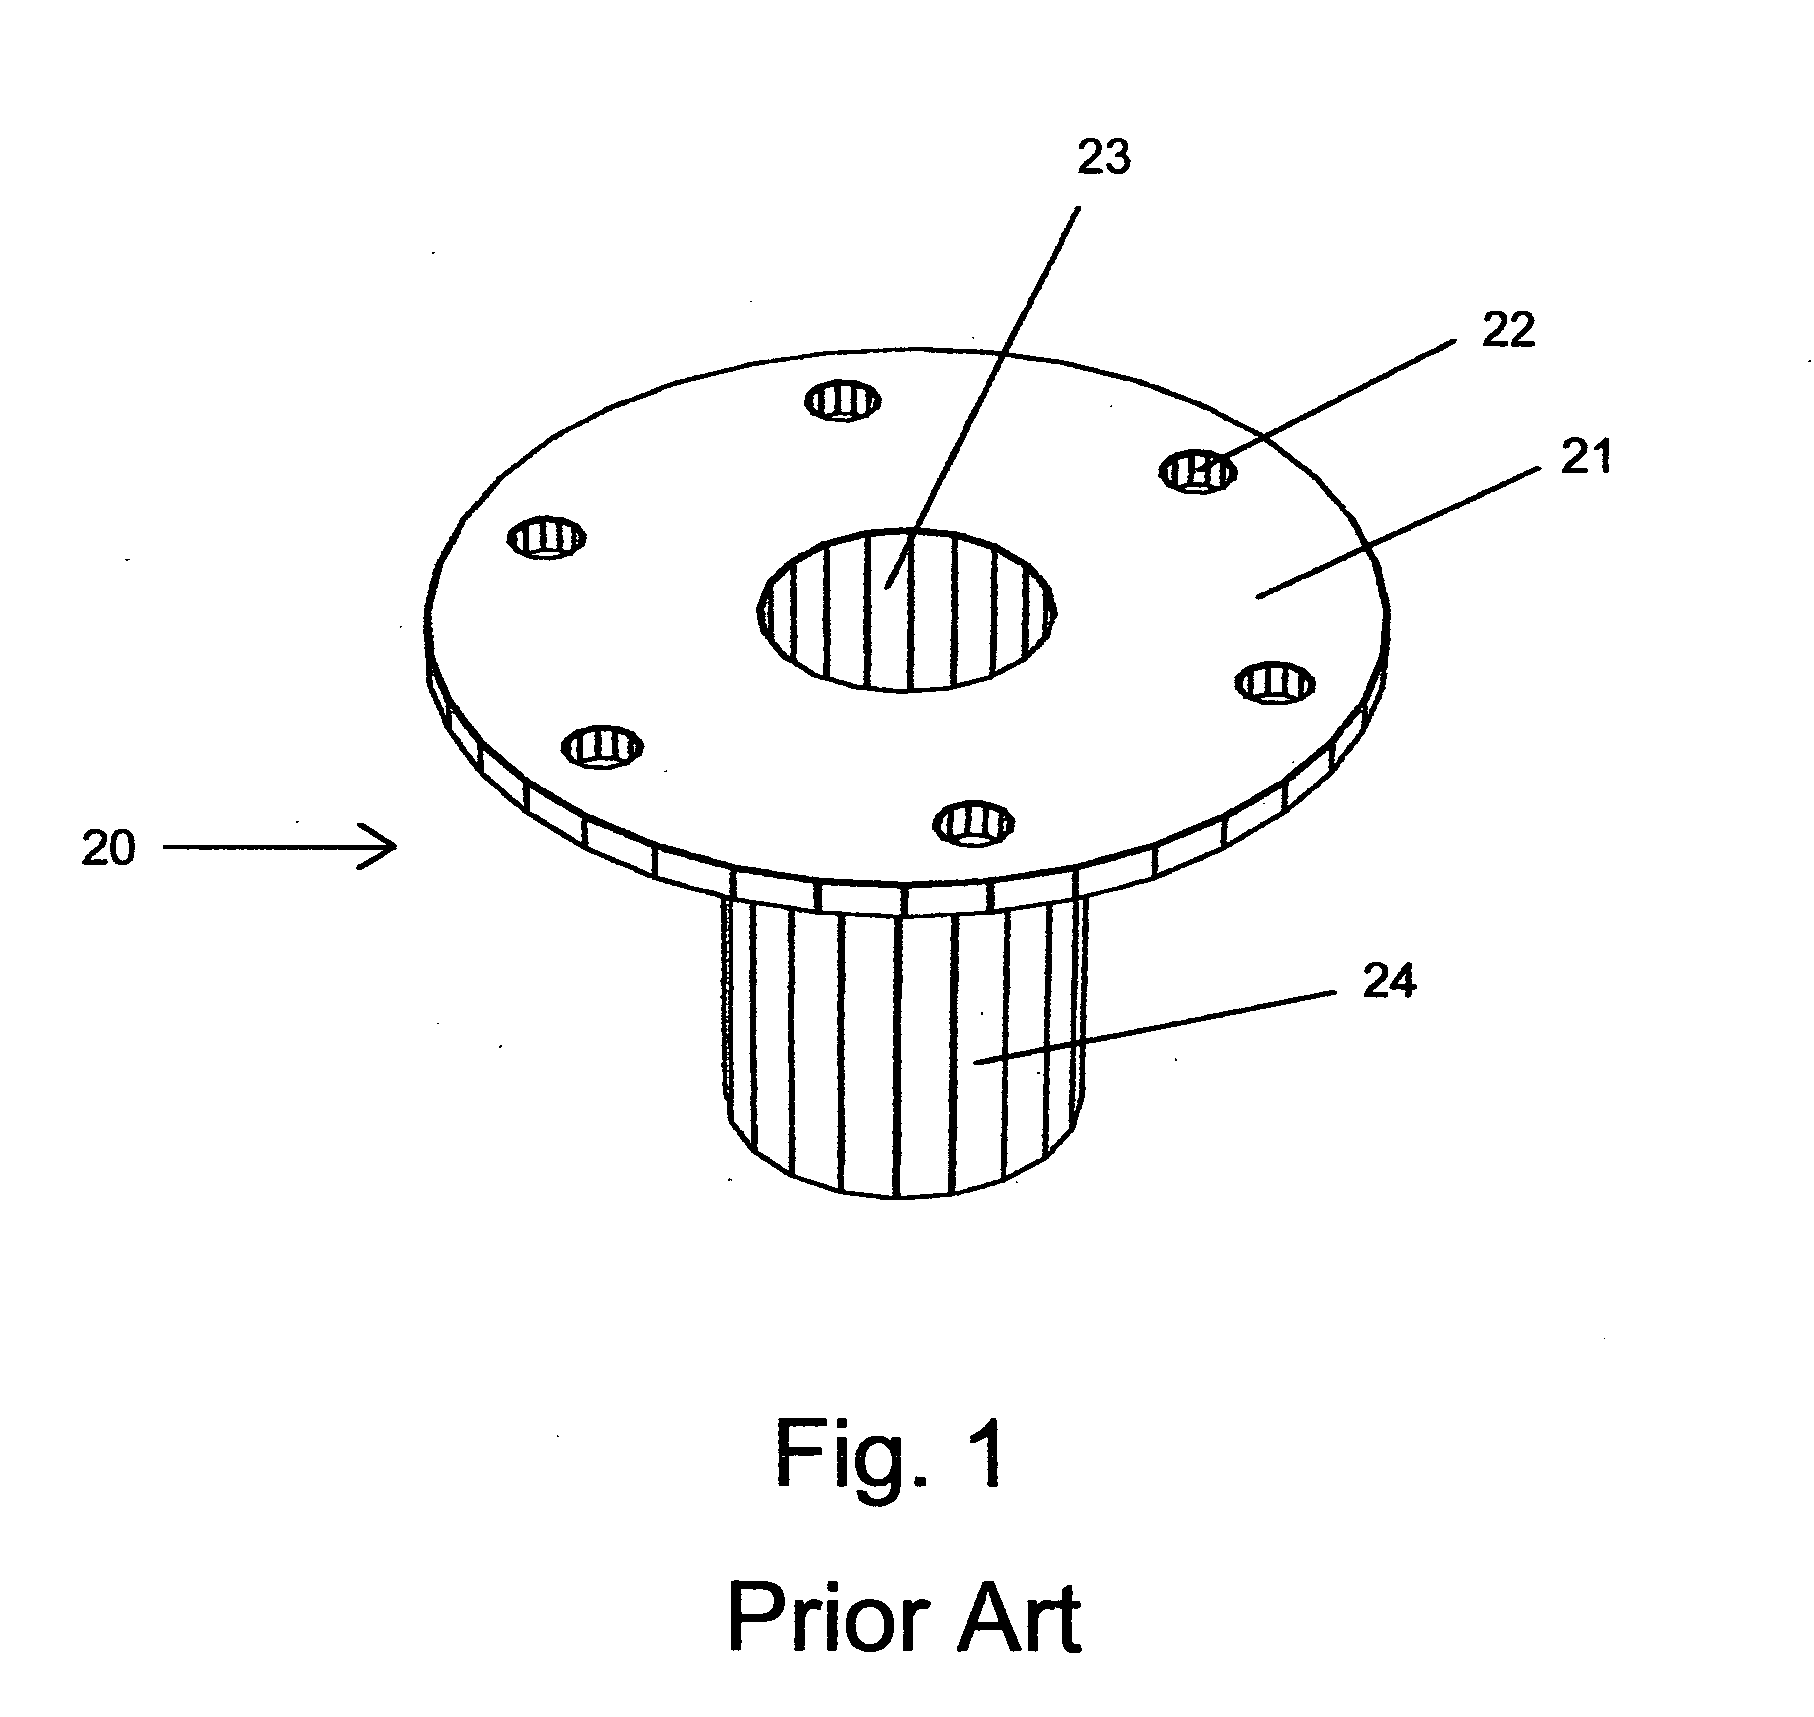 Extended flange plumbing for deep-sea oil containment